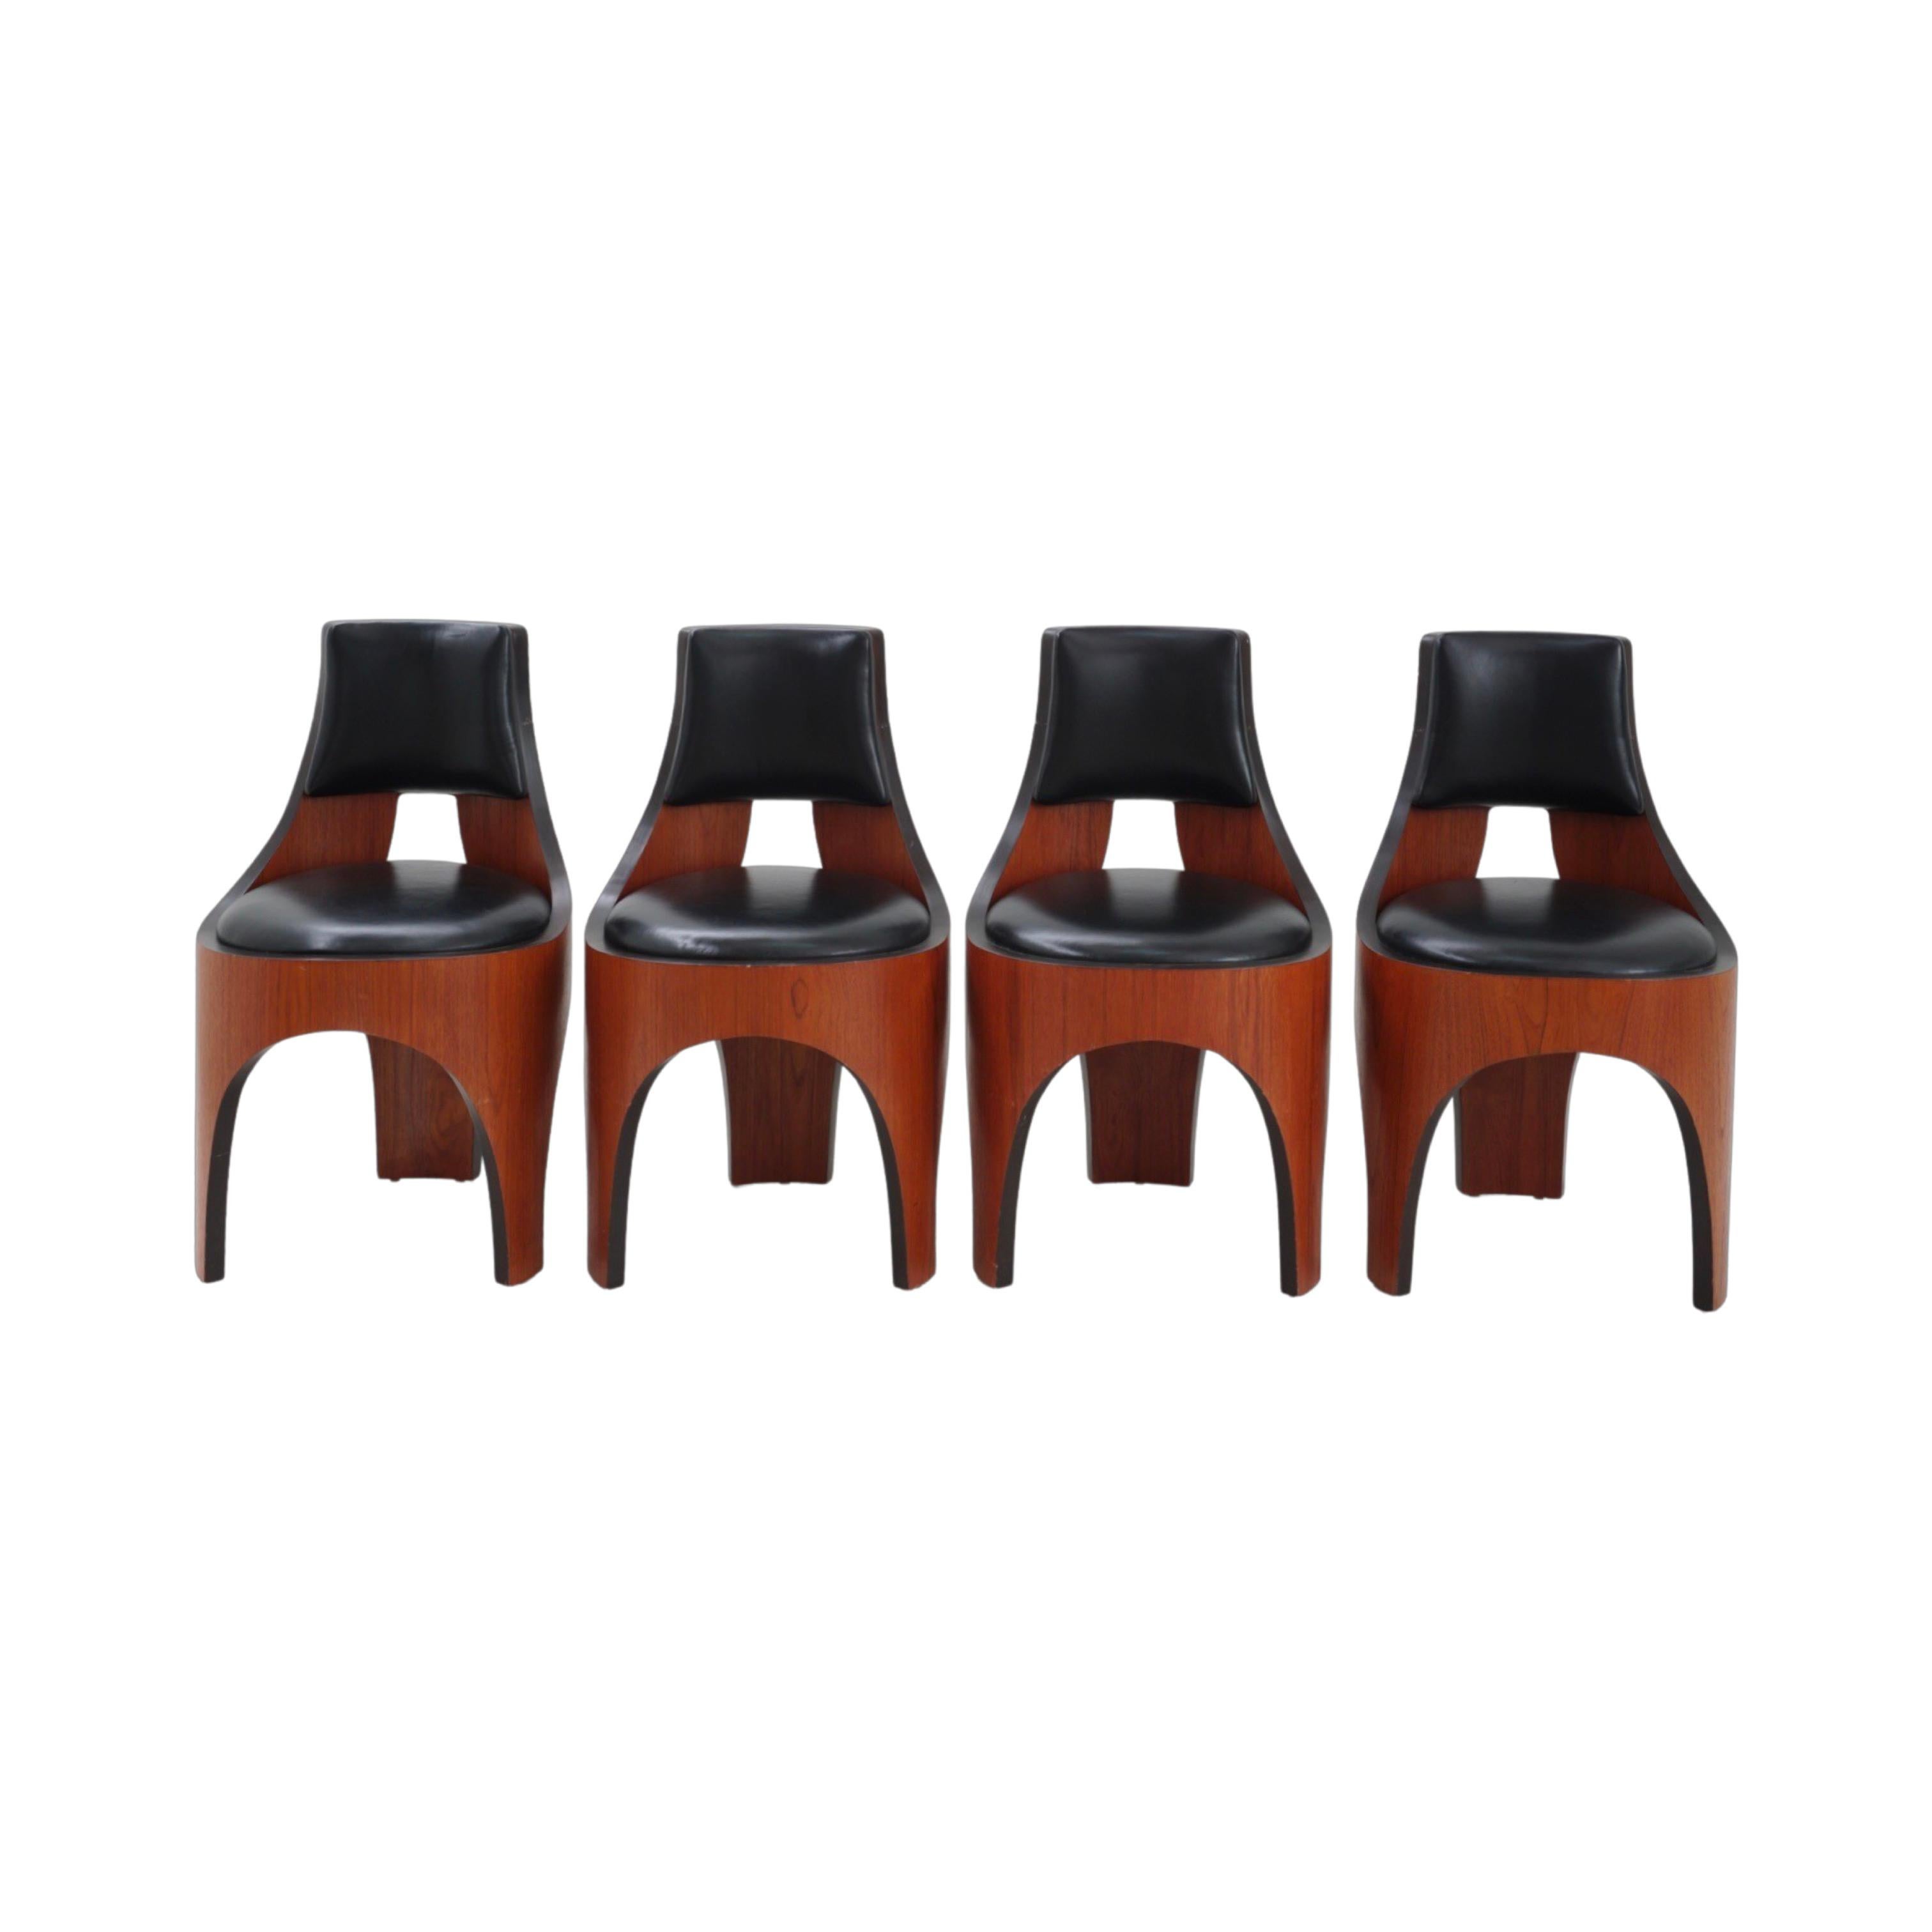 Faux Leather Set of 4 Cylindra Chairs by Henry P. Glass, 1966 For Sale